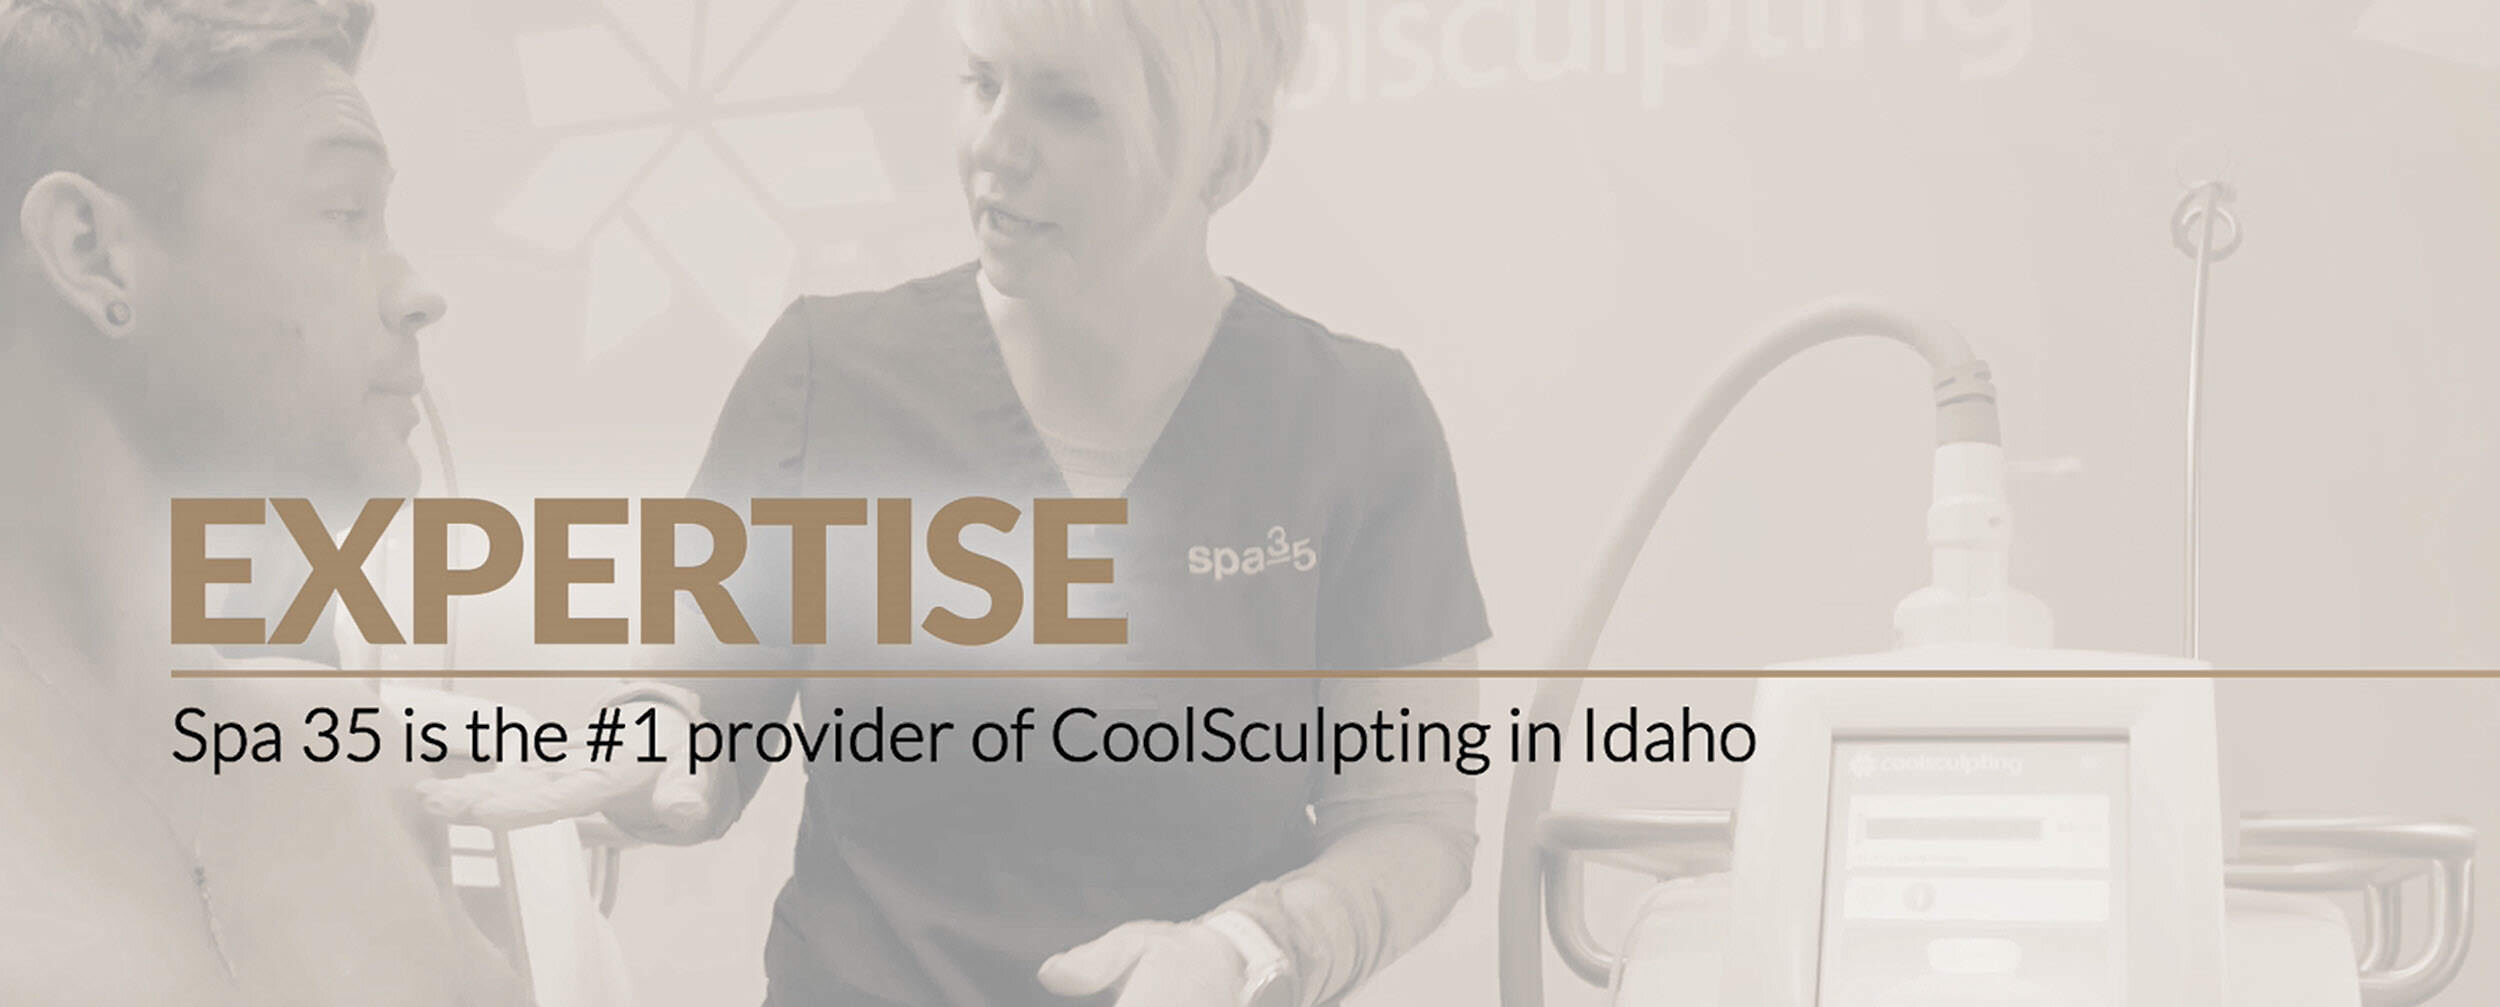 Master Certified in CoolSculpting, Consultants to Candela Medical - Worldwide leaders in cosmetic lasers (Copy)